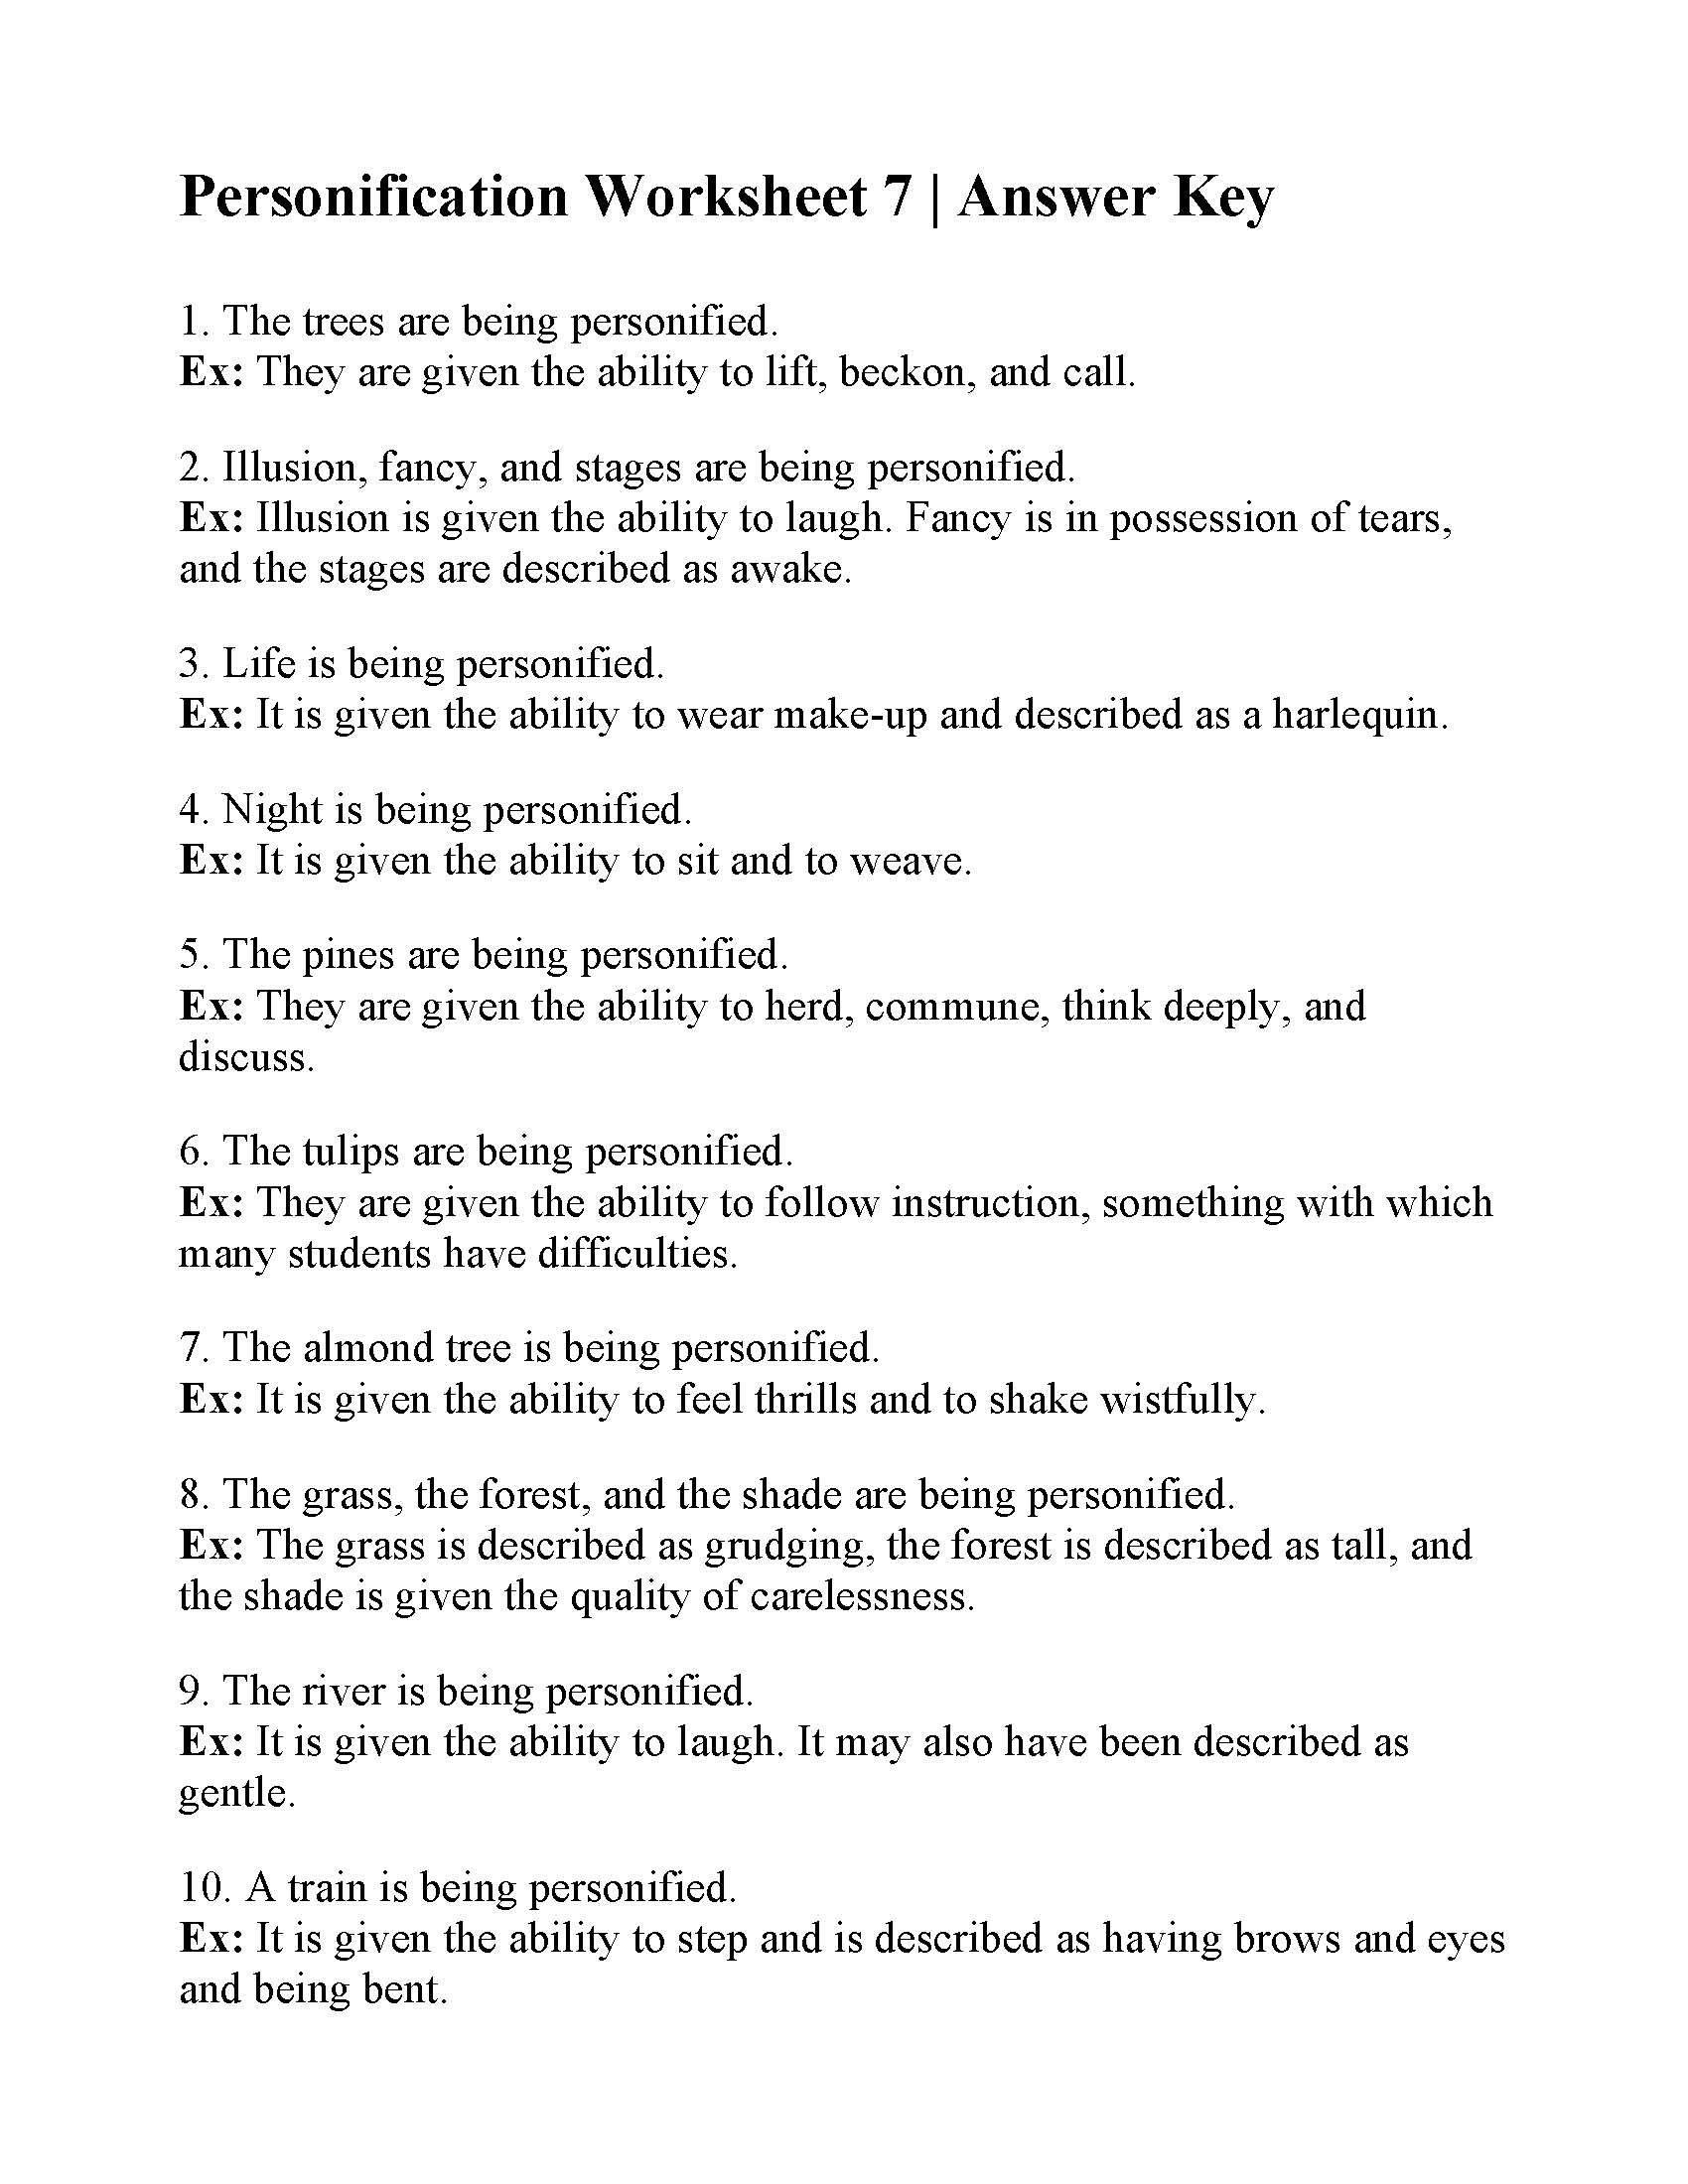 Personification Worksheet 7 Answers